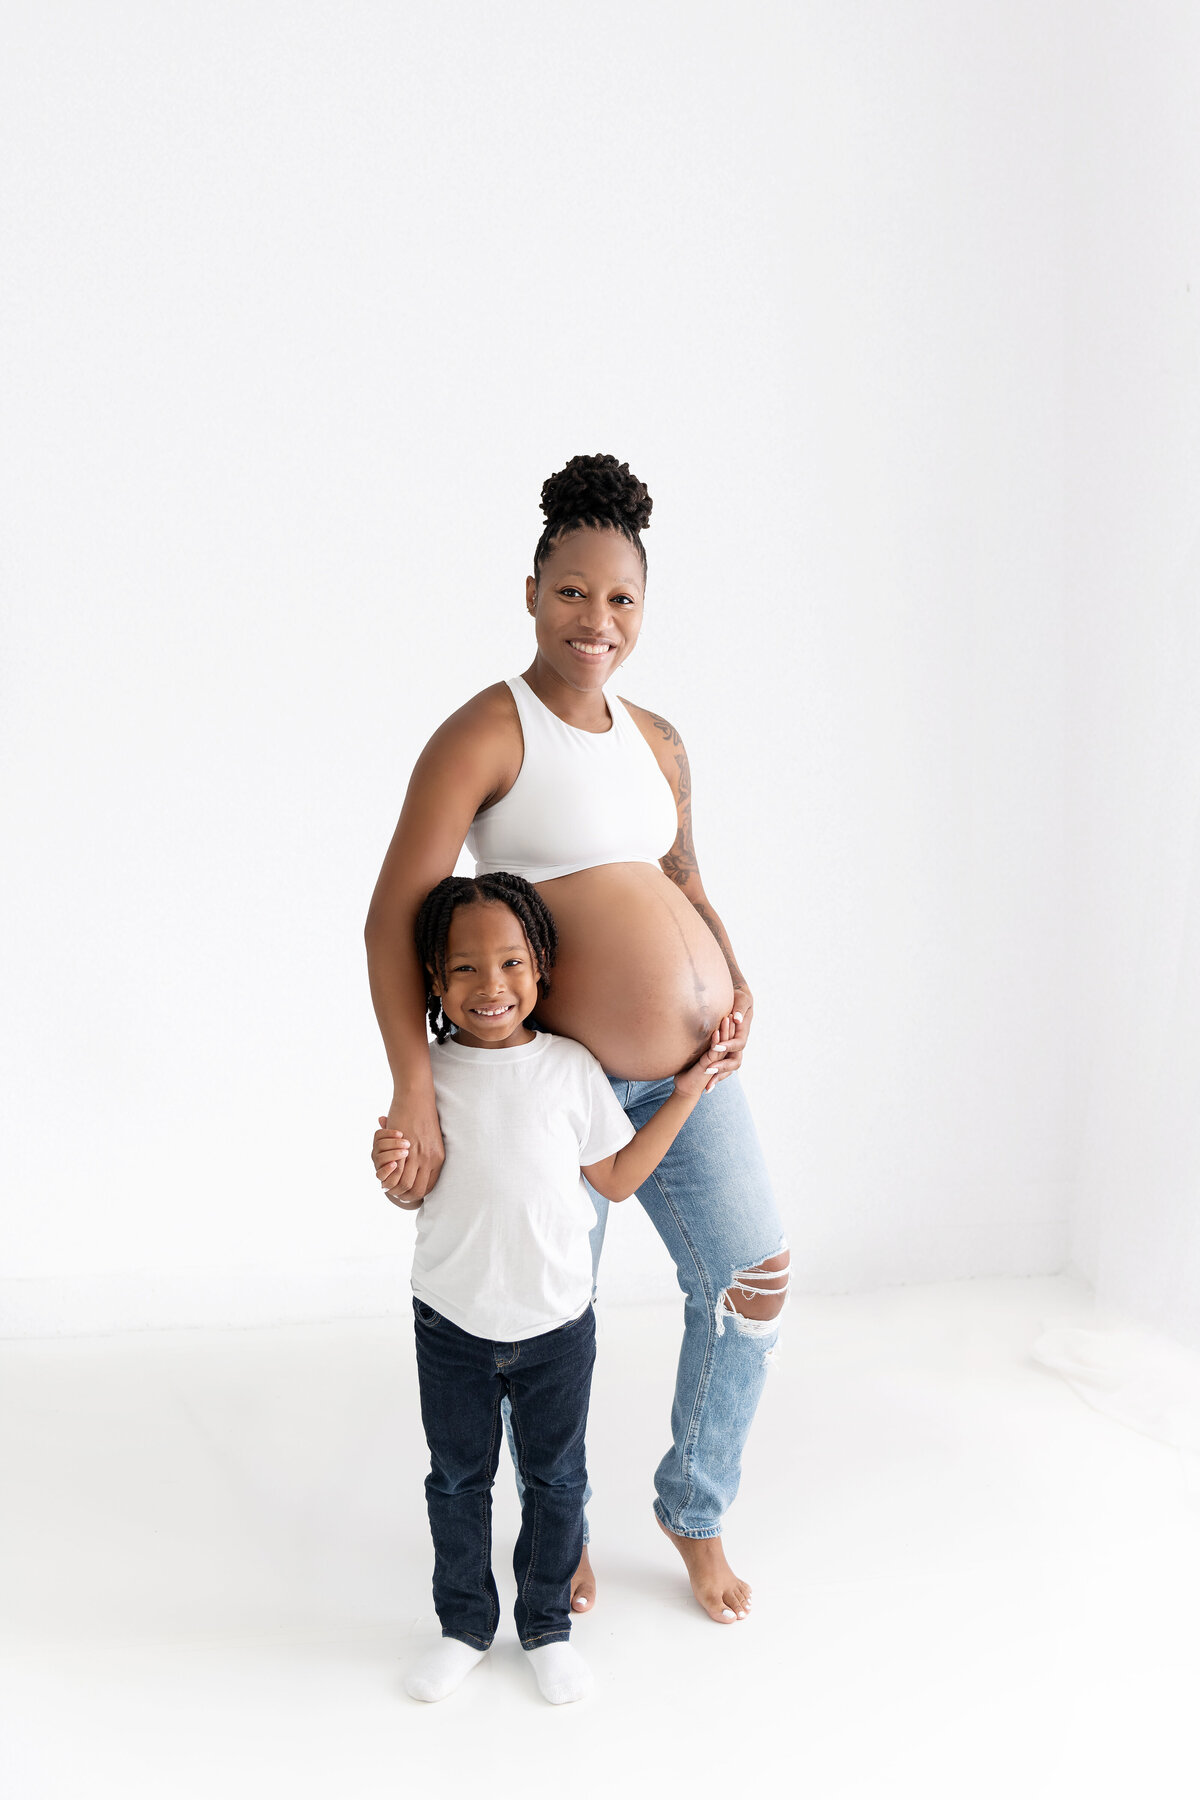 An expecting mother stands in a studio in jeans with her toddler son holding the bump with her